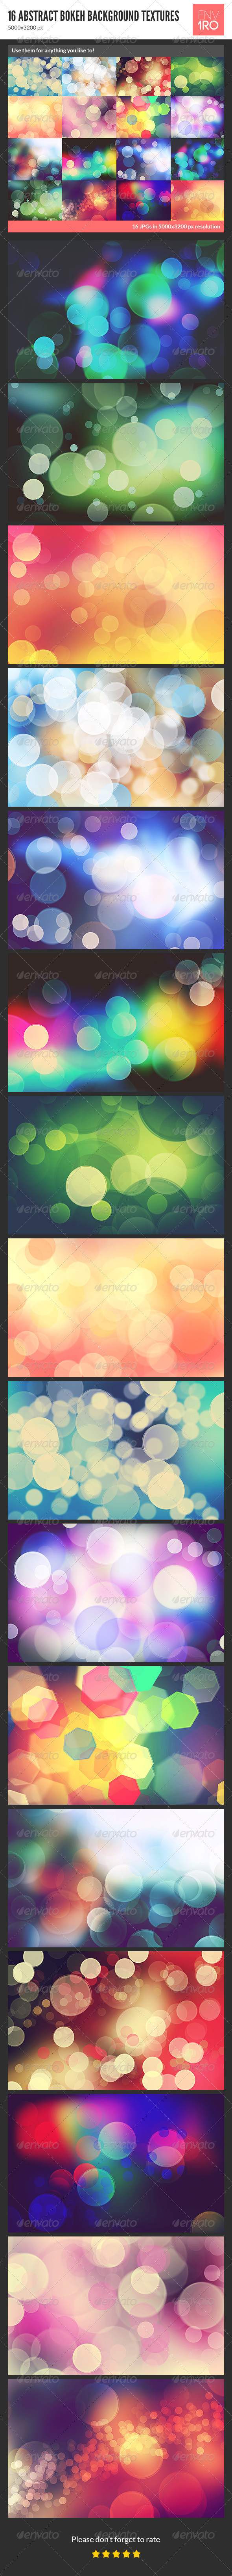 16 hq abstract bokeh textures backgrounds high resolution